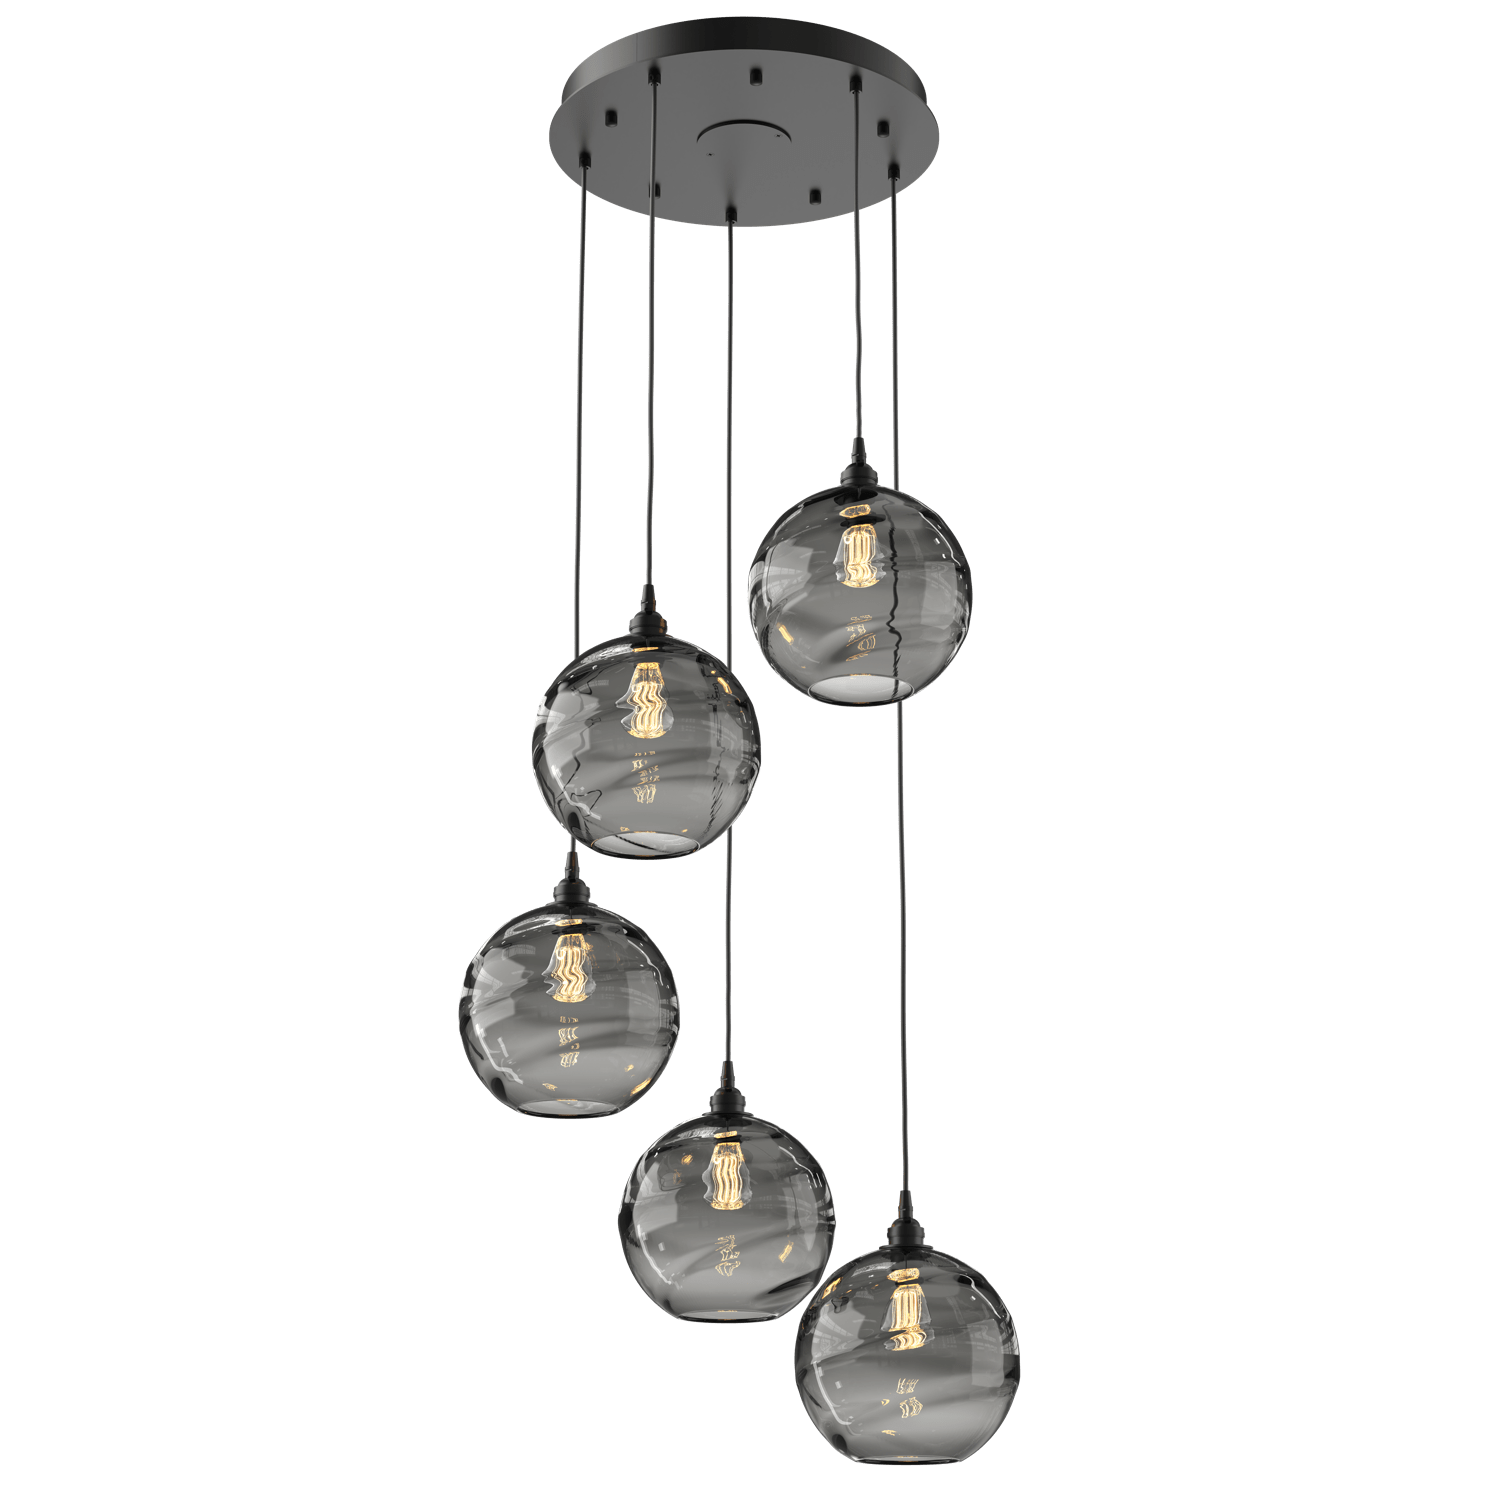 CHB0047-05-MB-OS-Hammerton-Studio-Optic-Blown-Glass-Terra-5-light-round-pendant-chandelier-with-matte-black-finish-and-optic-smoke-blown-glass-shades-and-incandescent-lamping